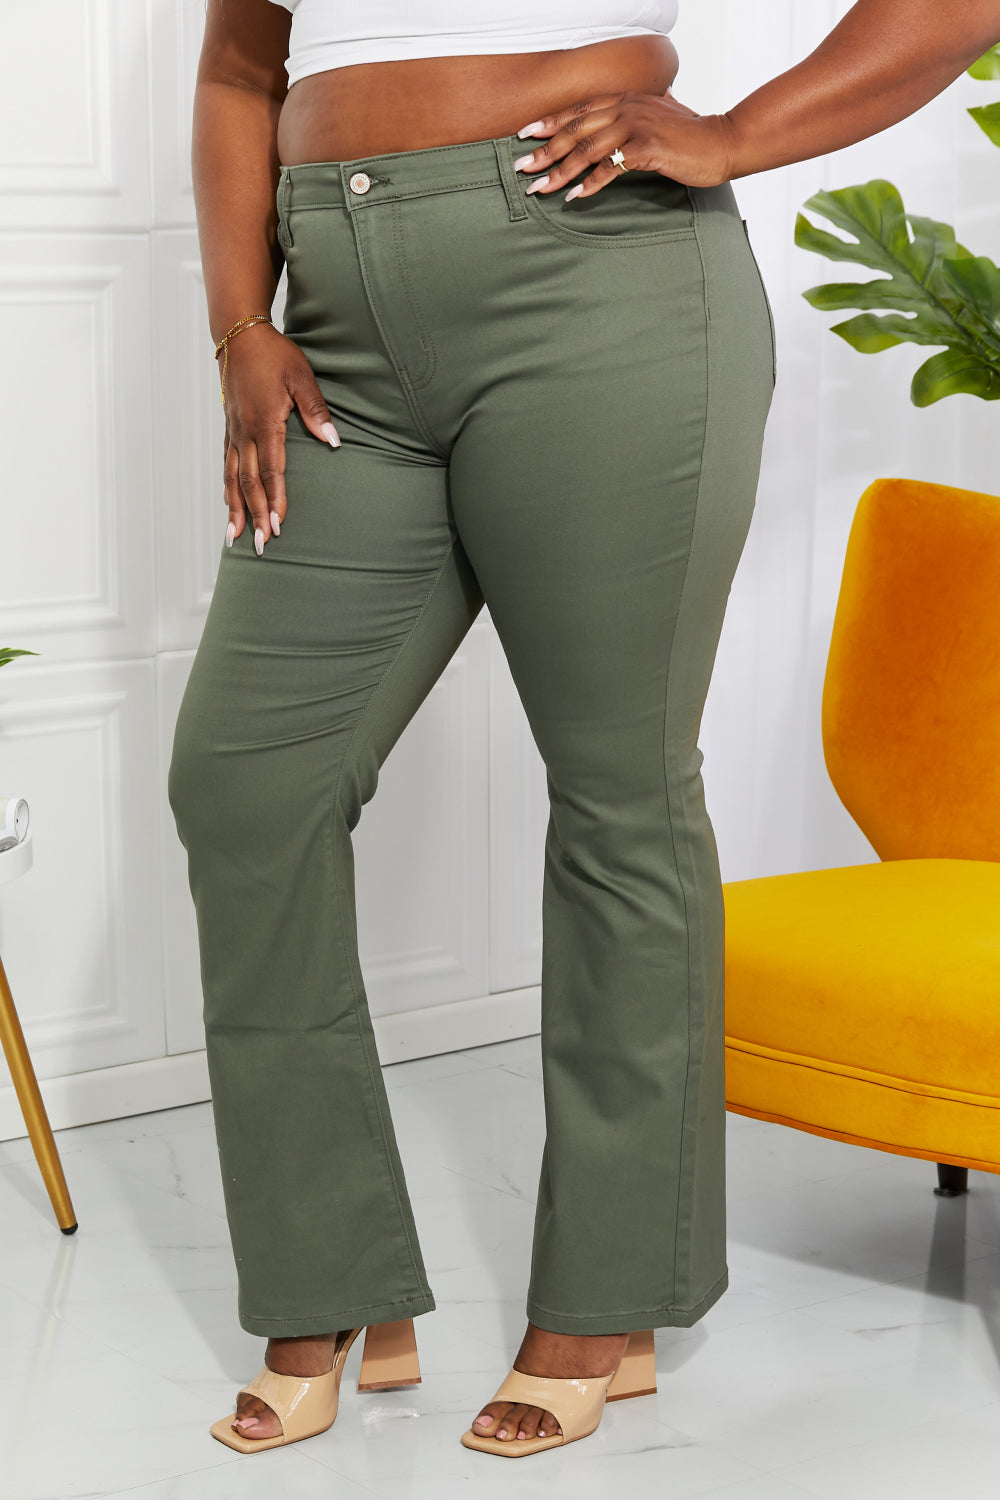 Zenana Clementine Full Size High-Rise Bootcut Jeans in Olive Print on any thing USA/STOD clothes